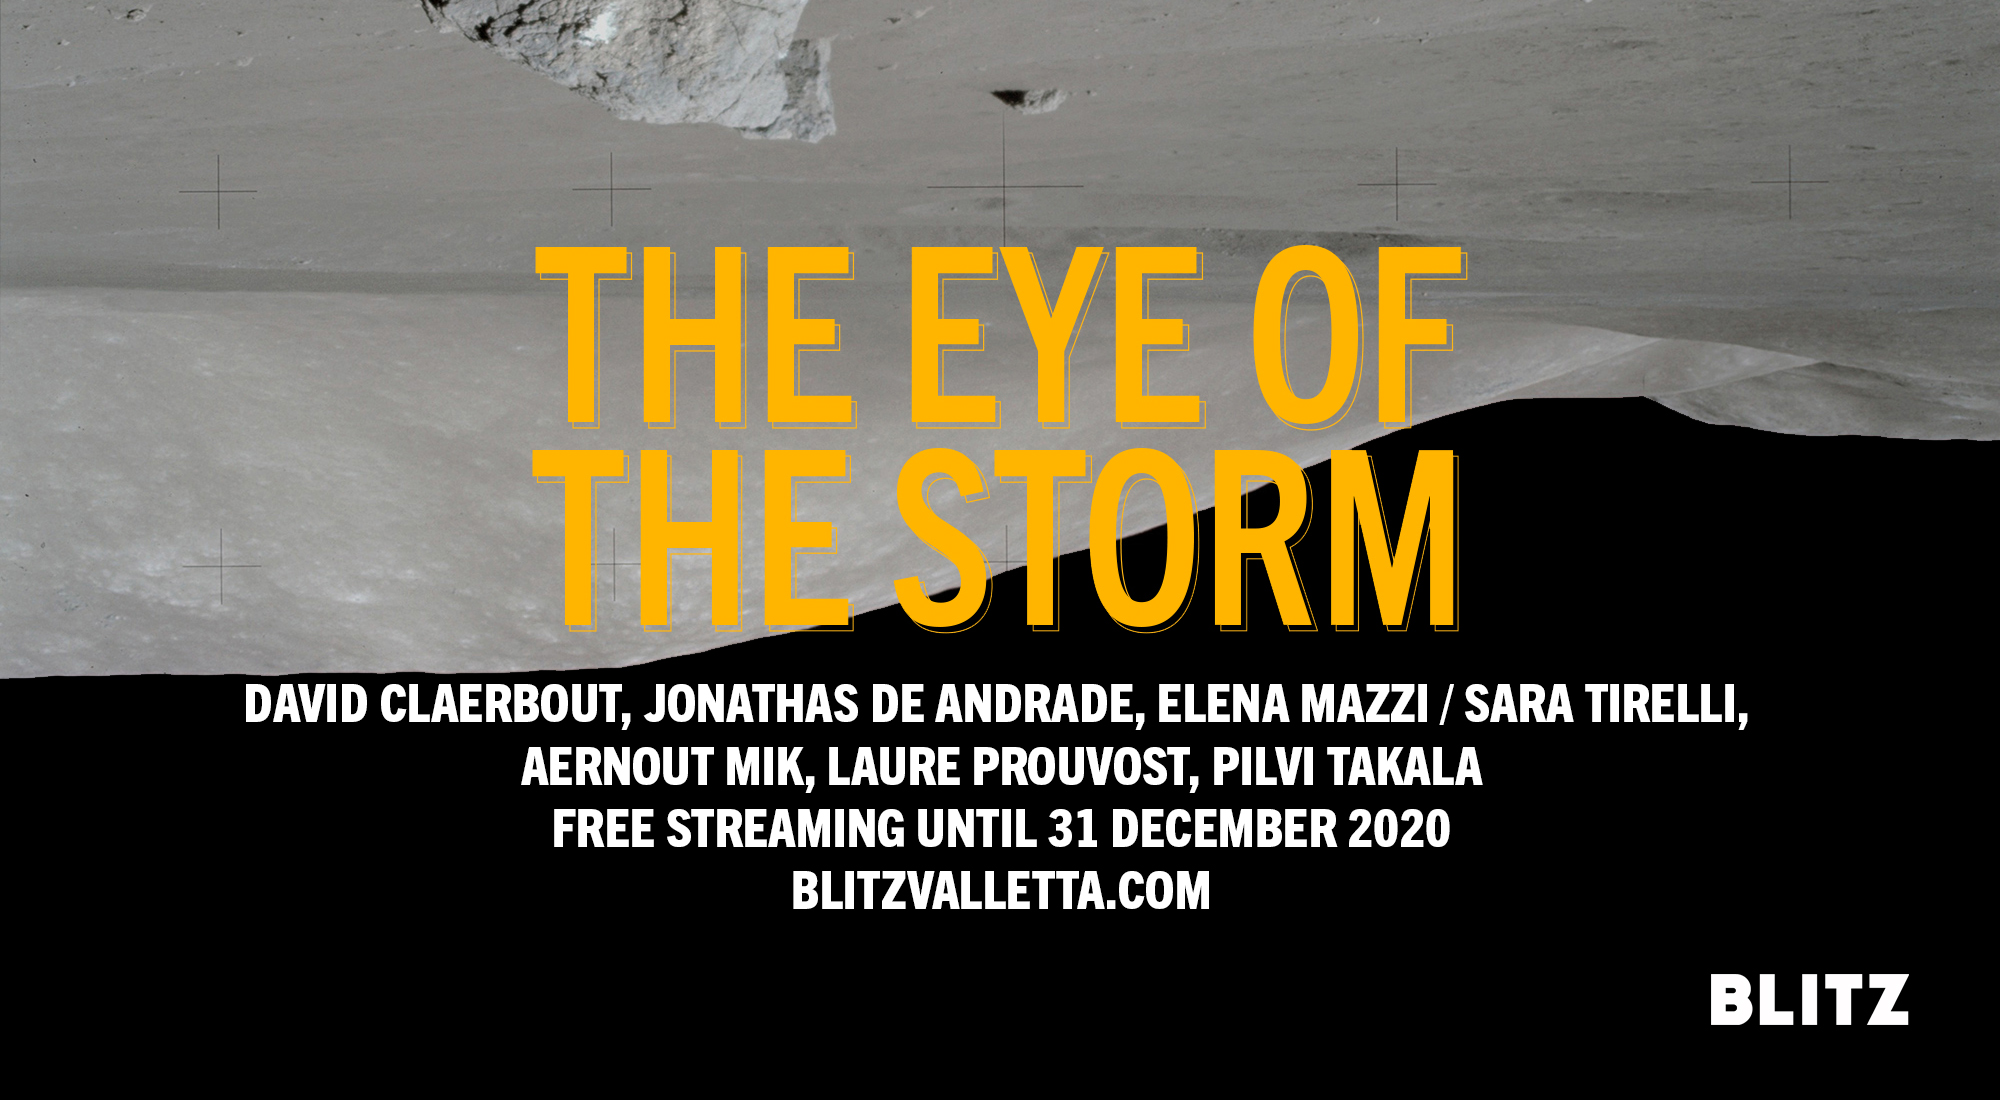 The Eye of the Storm online exhibition developed by Alexandra Pace